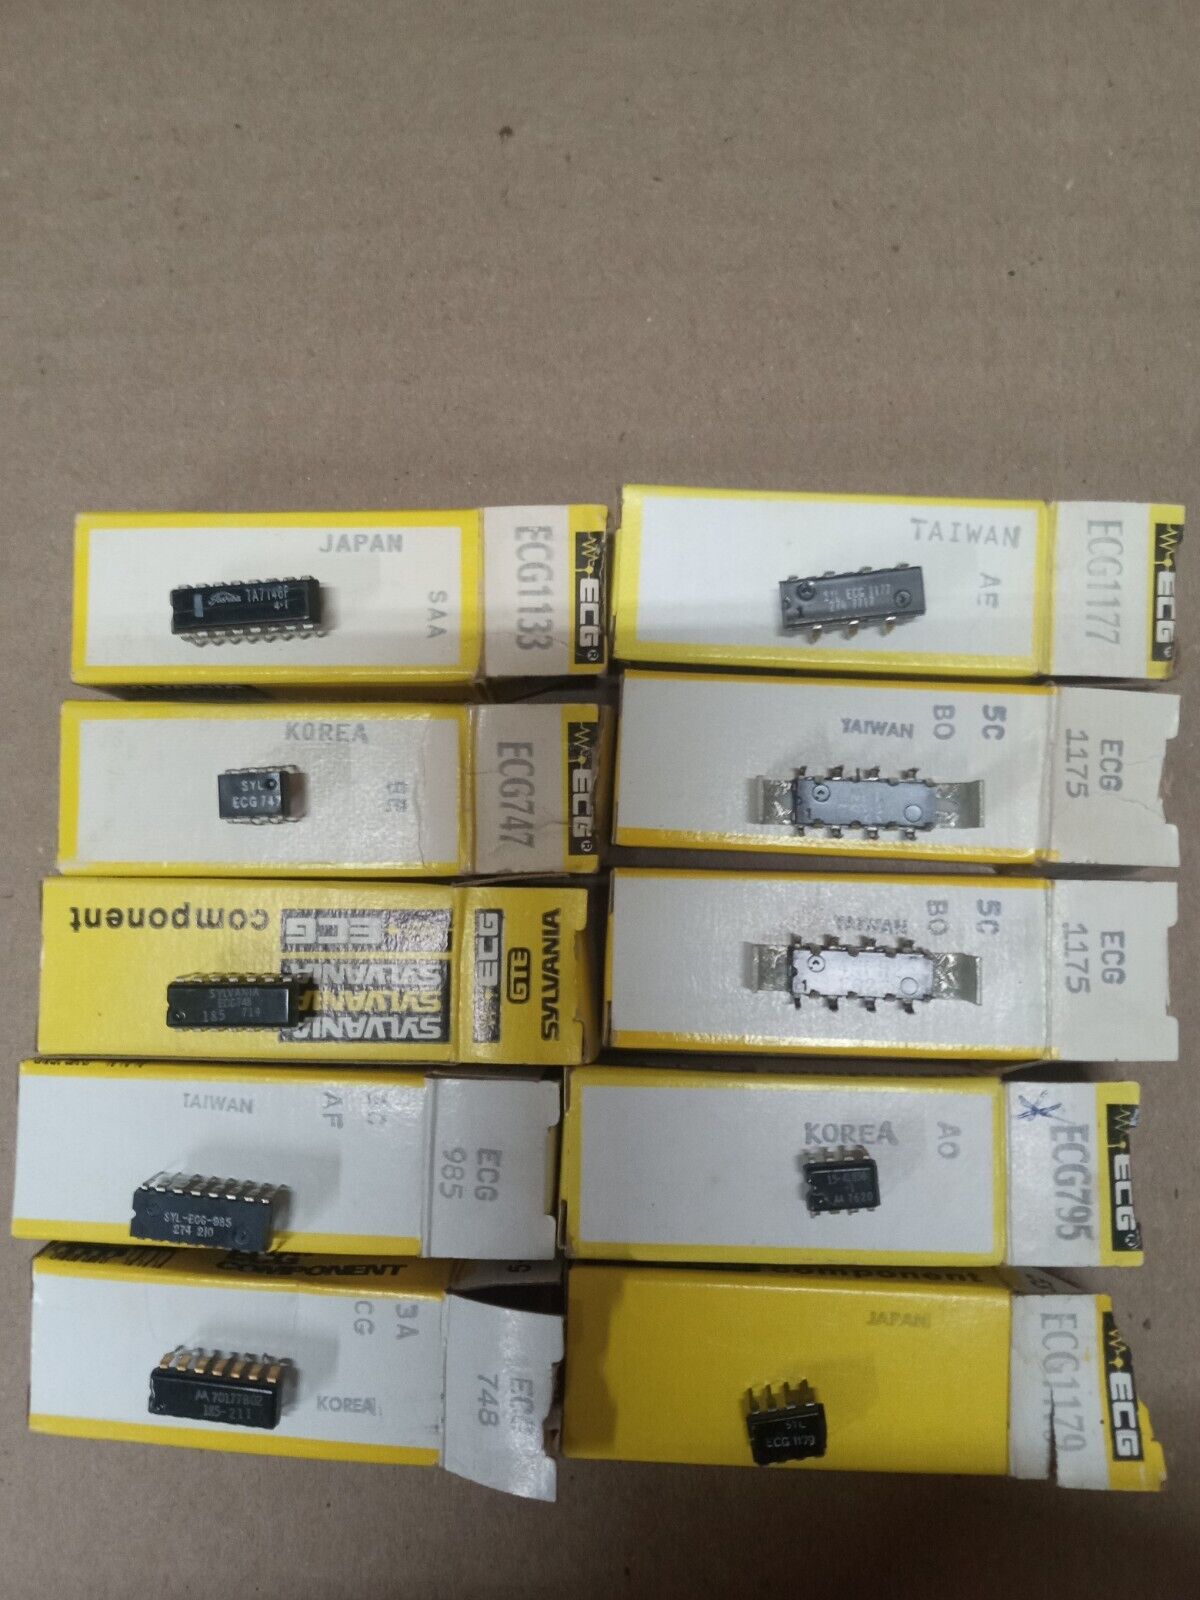 Intergreated circut (IC chips) NOS lot